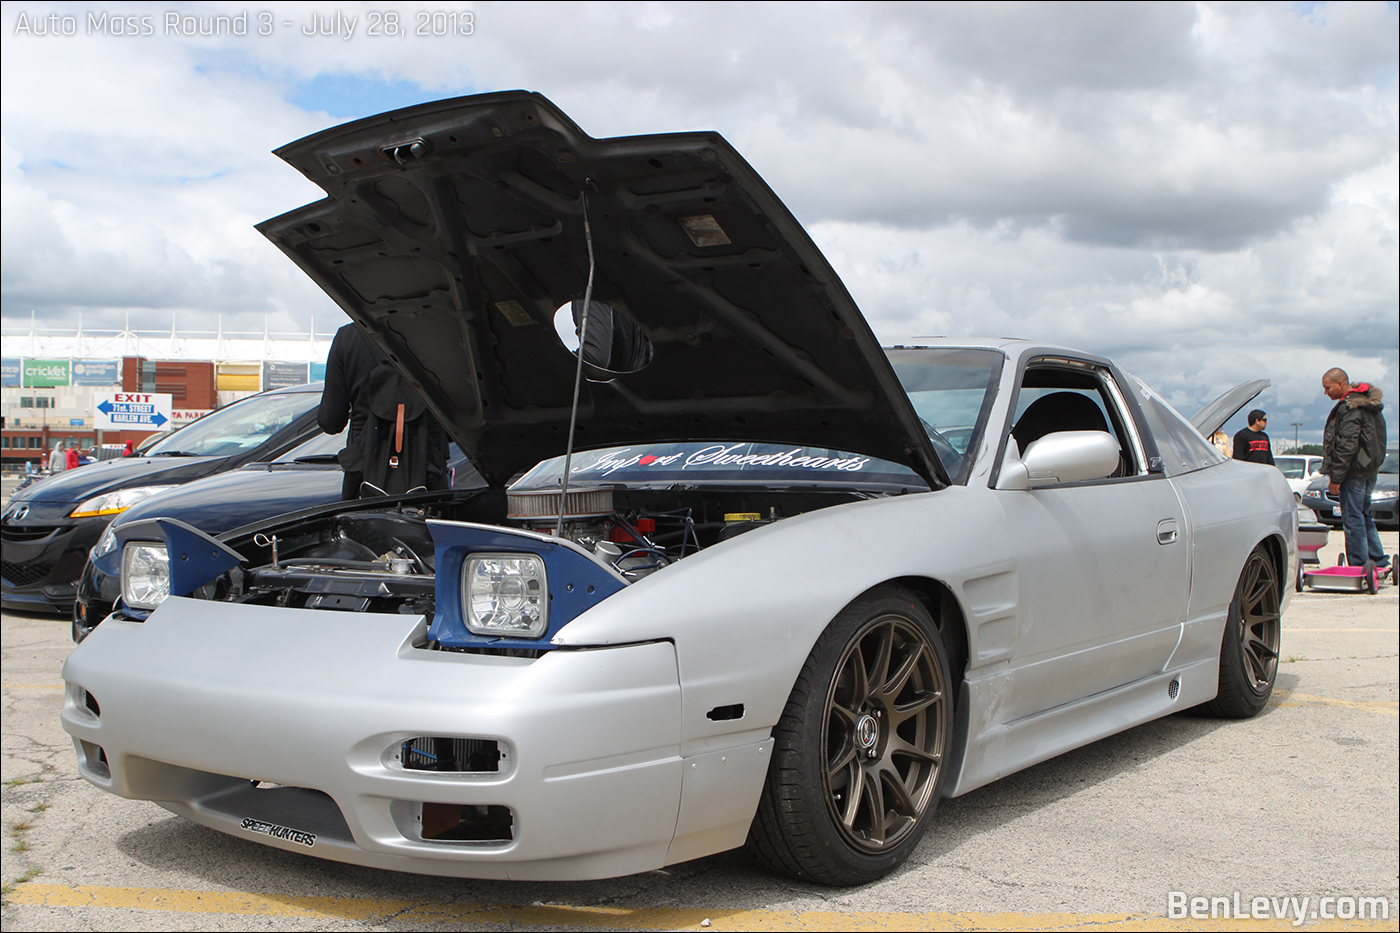 Silver 240SX with V8